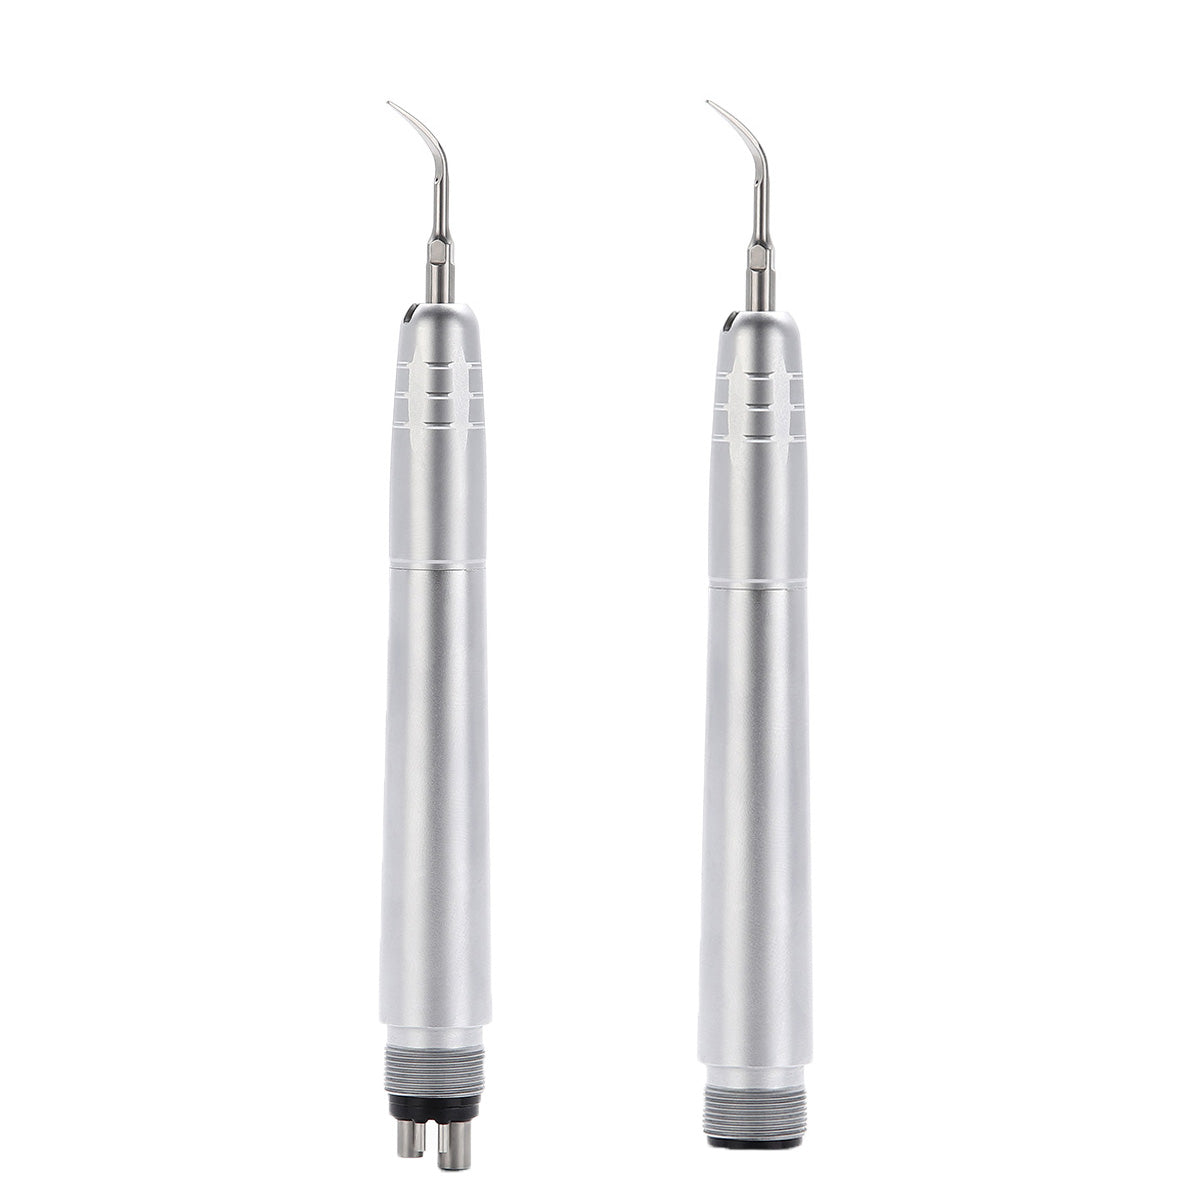 2/4 Holes Dental Air Scaler Handpiece With 3 Scaler Tips (G1,G2,P1) - pairaydental.com